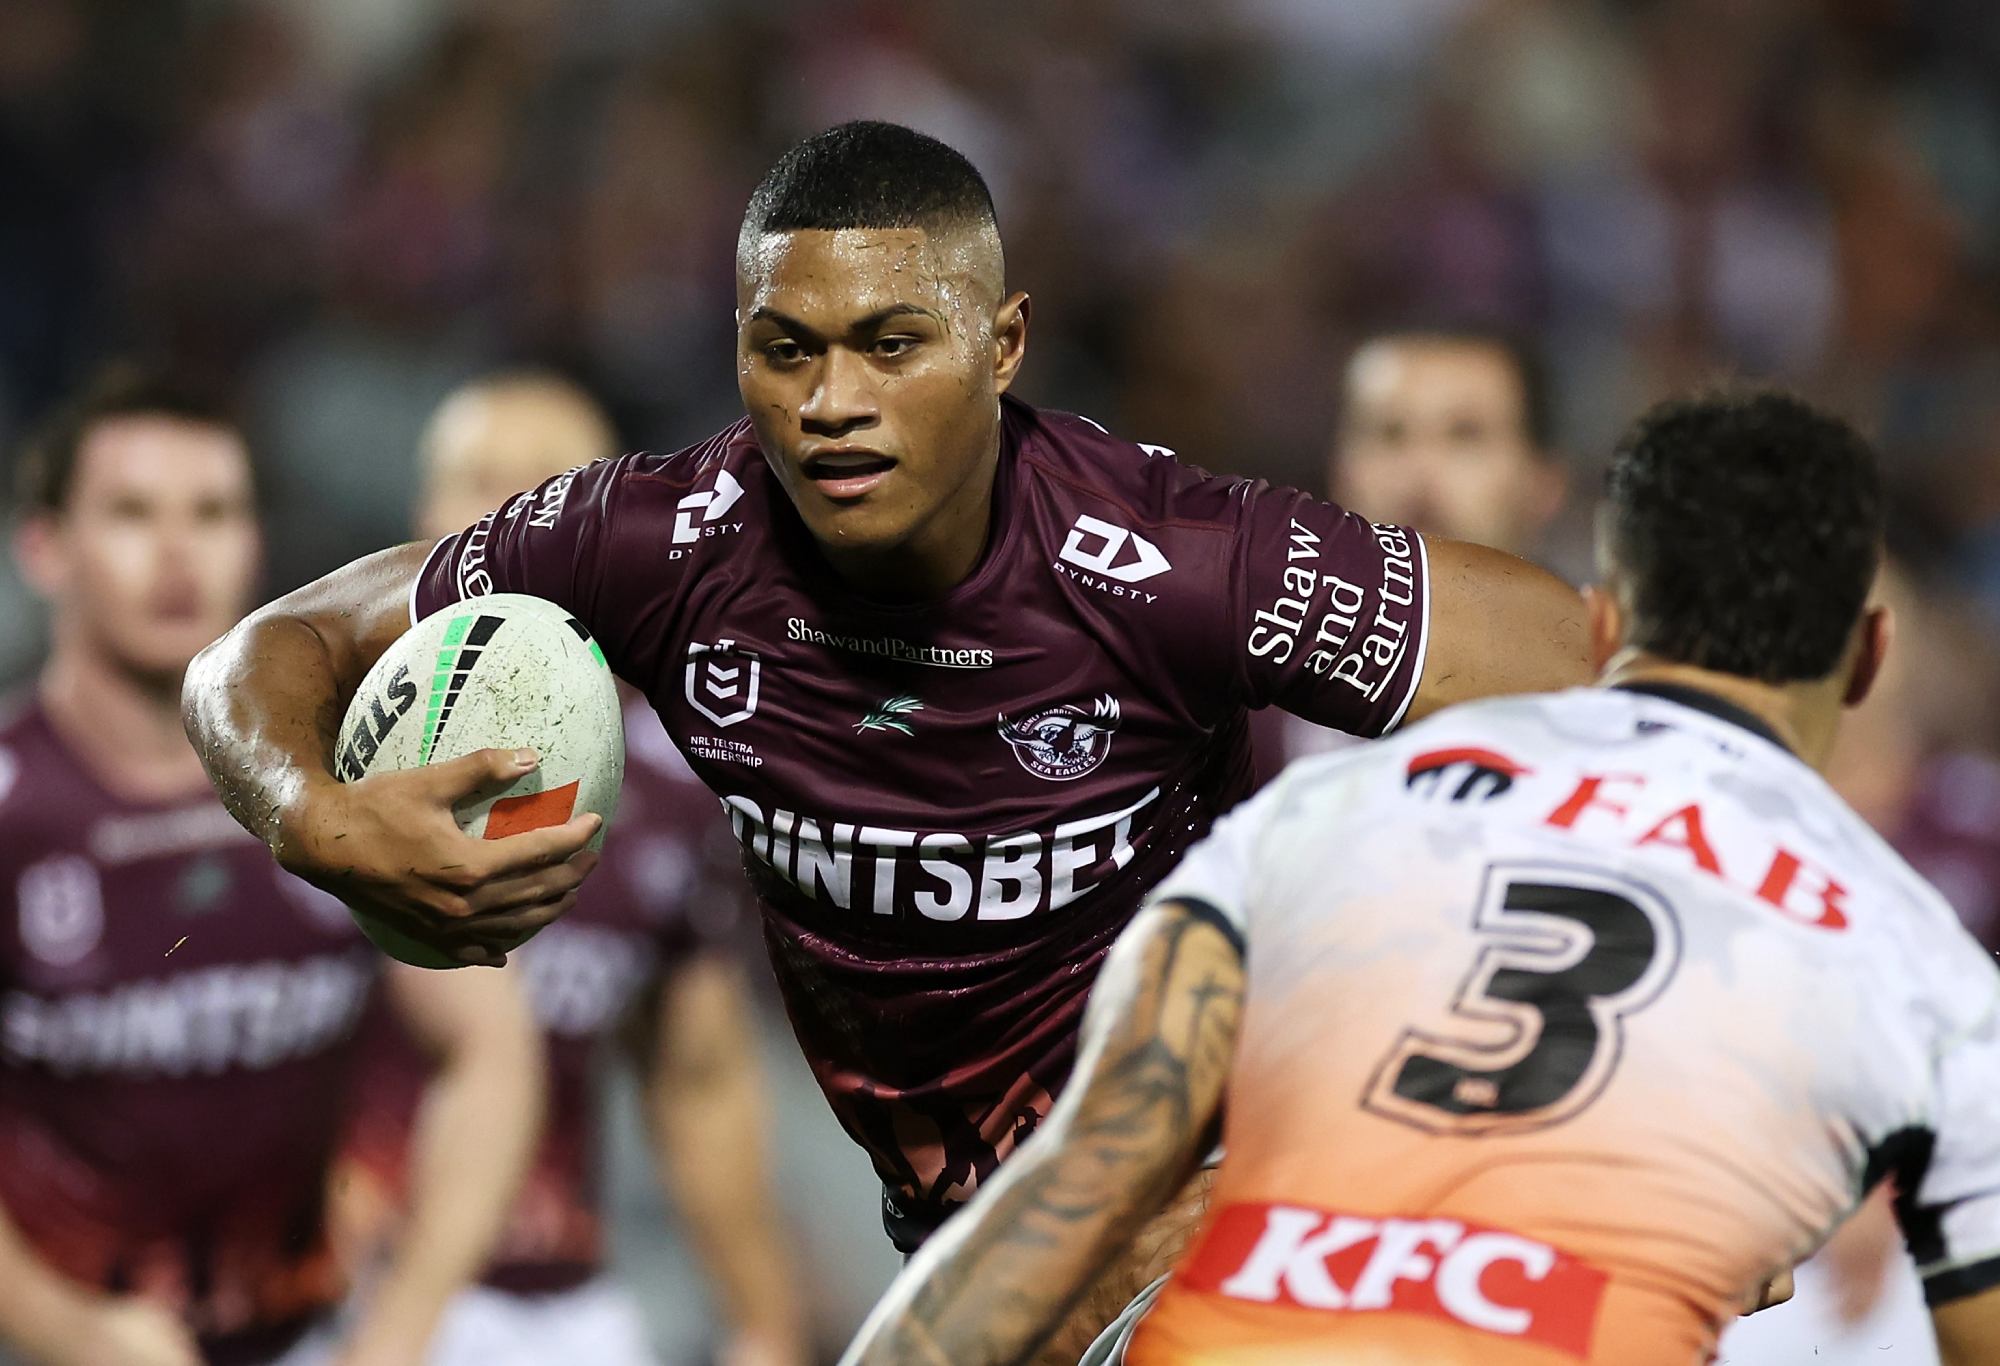 SYDNEY, AUSTRALIA - APRIL 23: Samuela Fainu of the Sea Eagles runs the ball during the round eight NRL match between Wests Tigers and Manly Sea Eagles at Campbelltown Stadium on April 23, 2023 in Sydney, Australia. (Photo by Mark Kolbe/Getty Images)